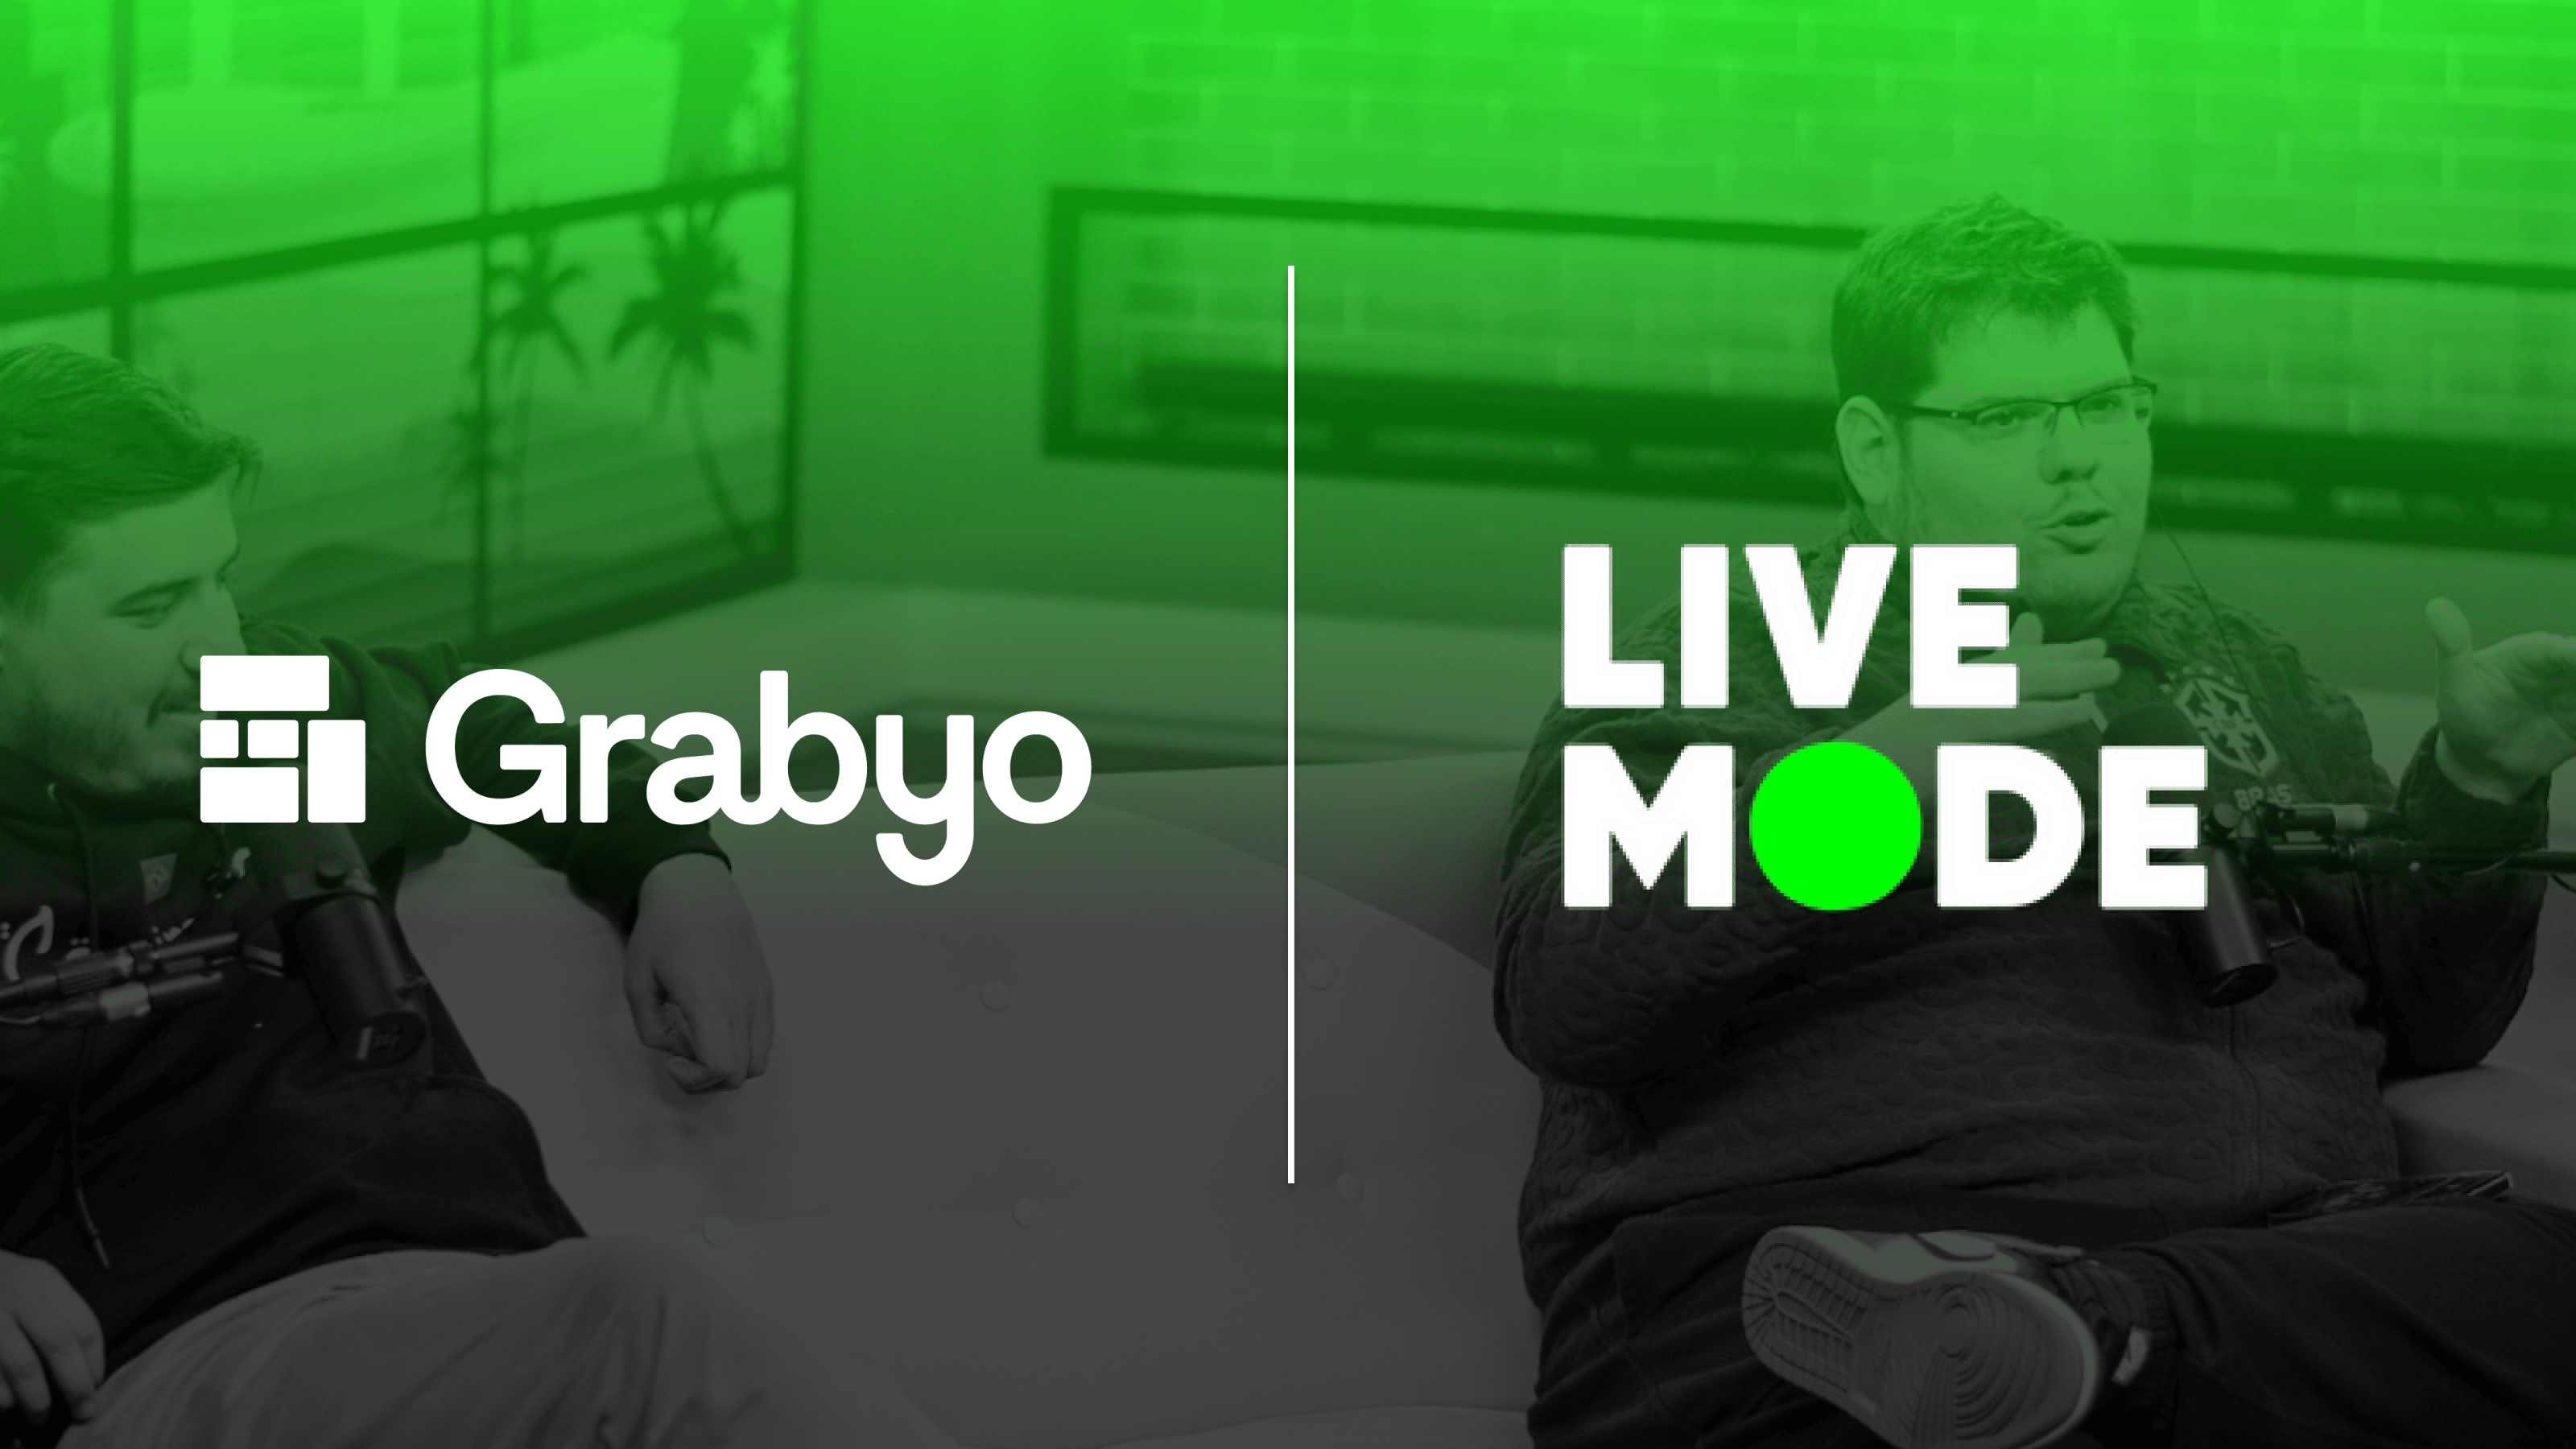 LiveMode chooses Grabyo to support it's digital broadcast in Brazil during 2022 Qatar FIFA World Cup